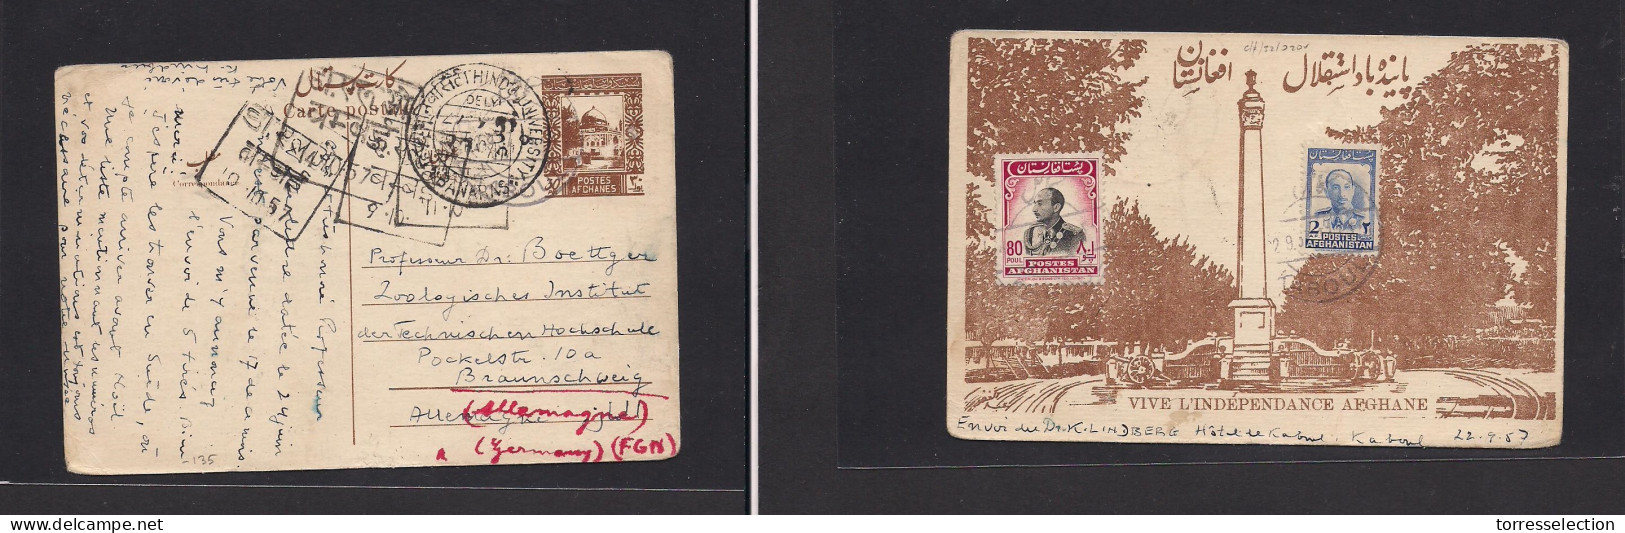 AFGHANISTAN. 1957 (22 Sept) Kaboul - Germany, Braunschweig. 30p Brown Illustrated Stationary Ppc + Reverse Fkd + Transit - Afghanistan